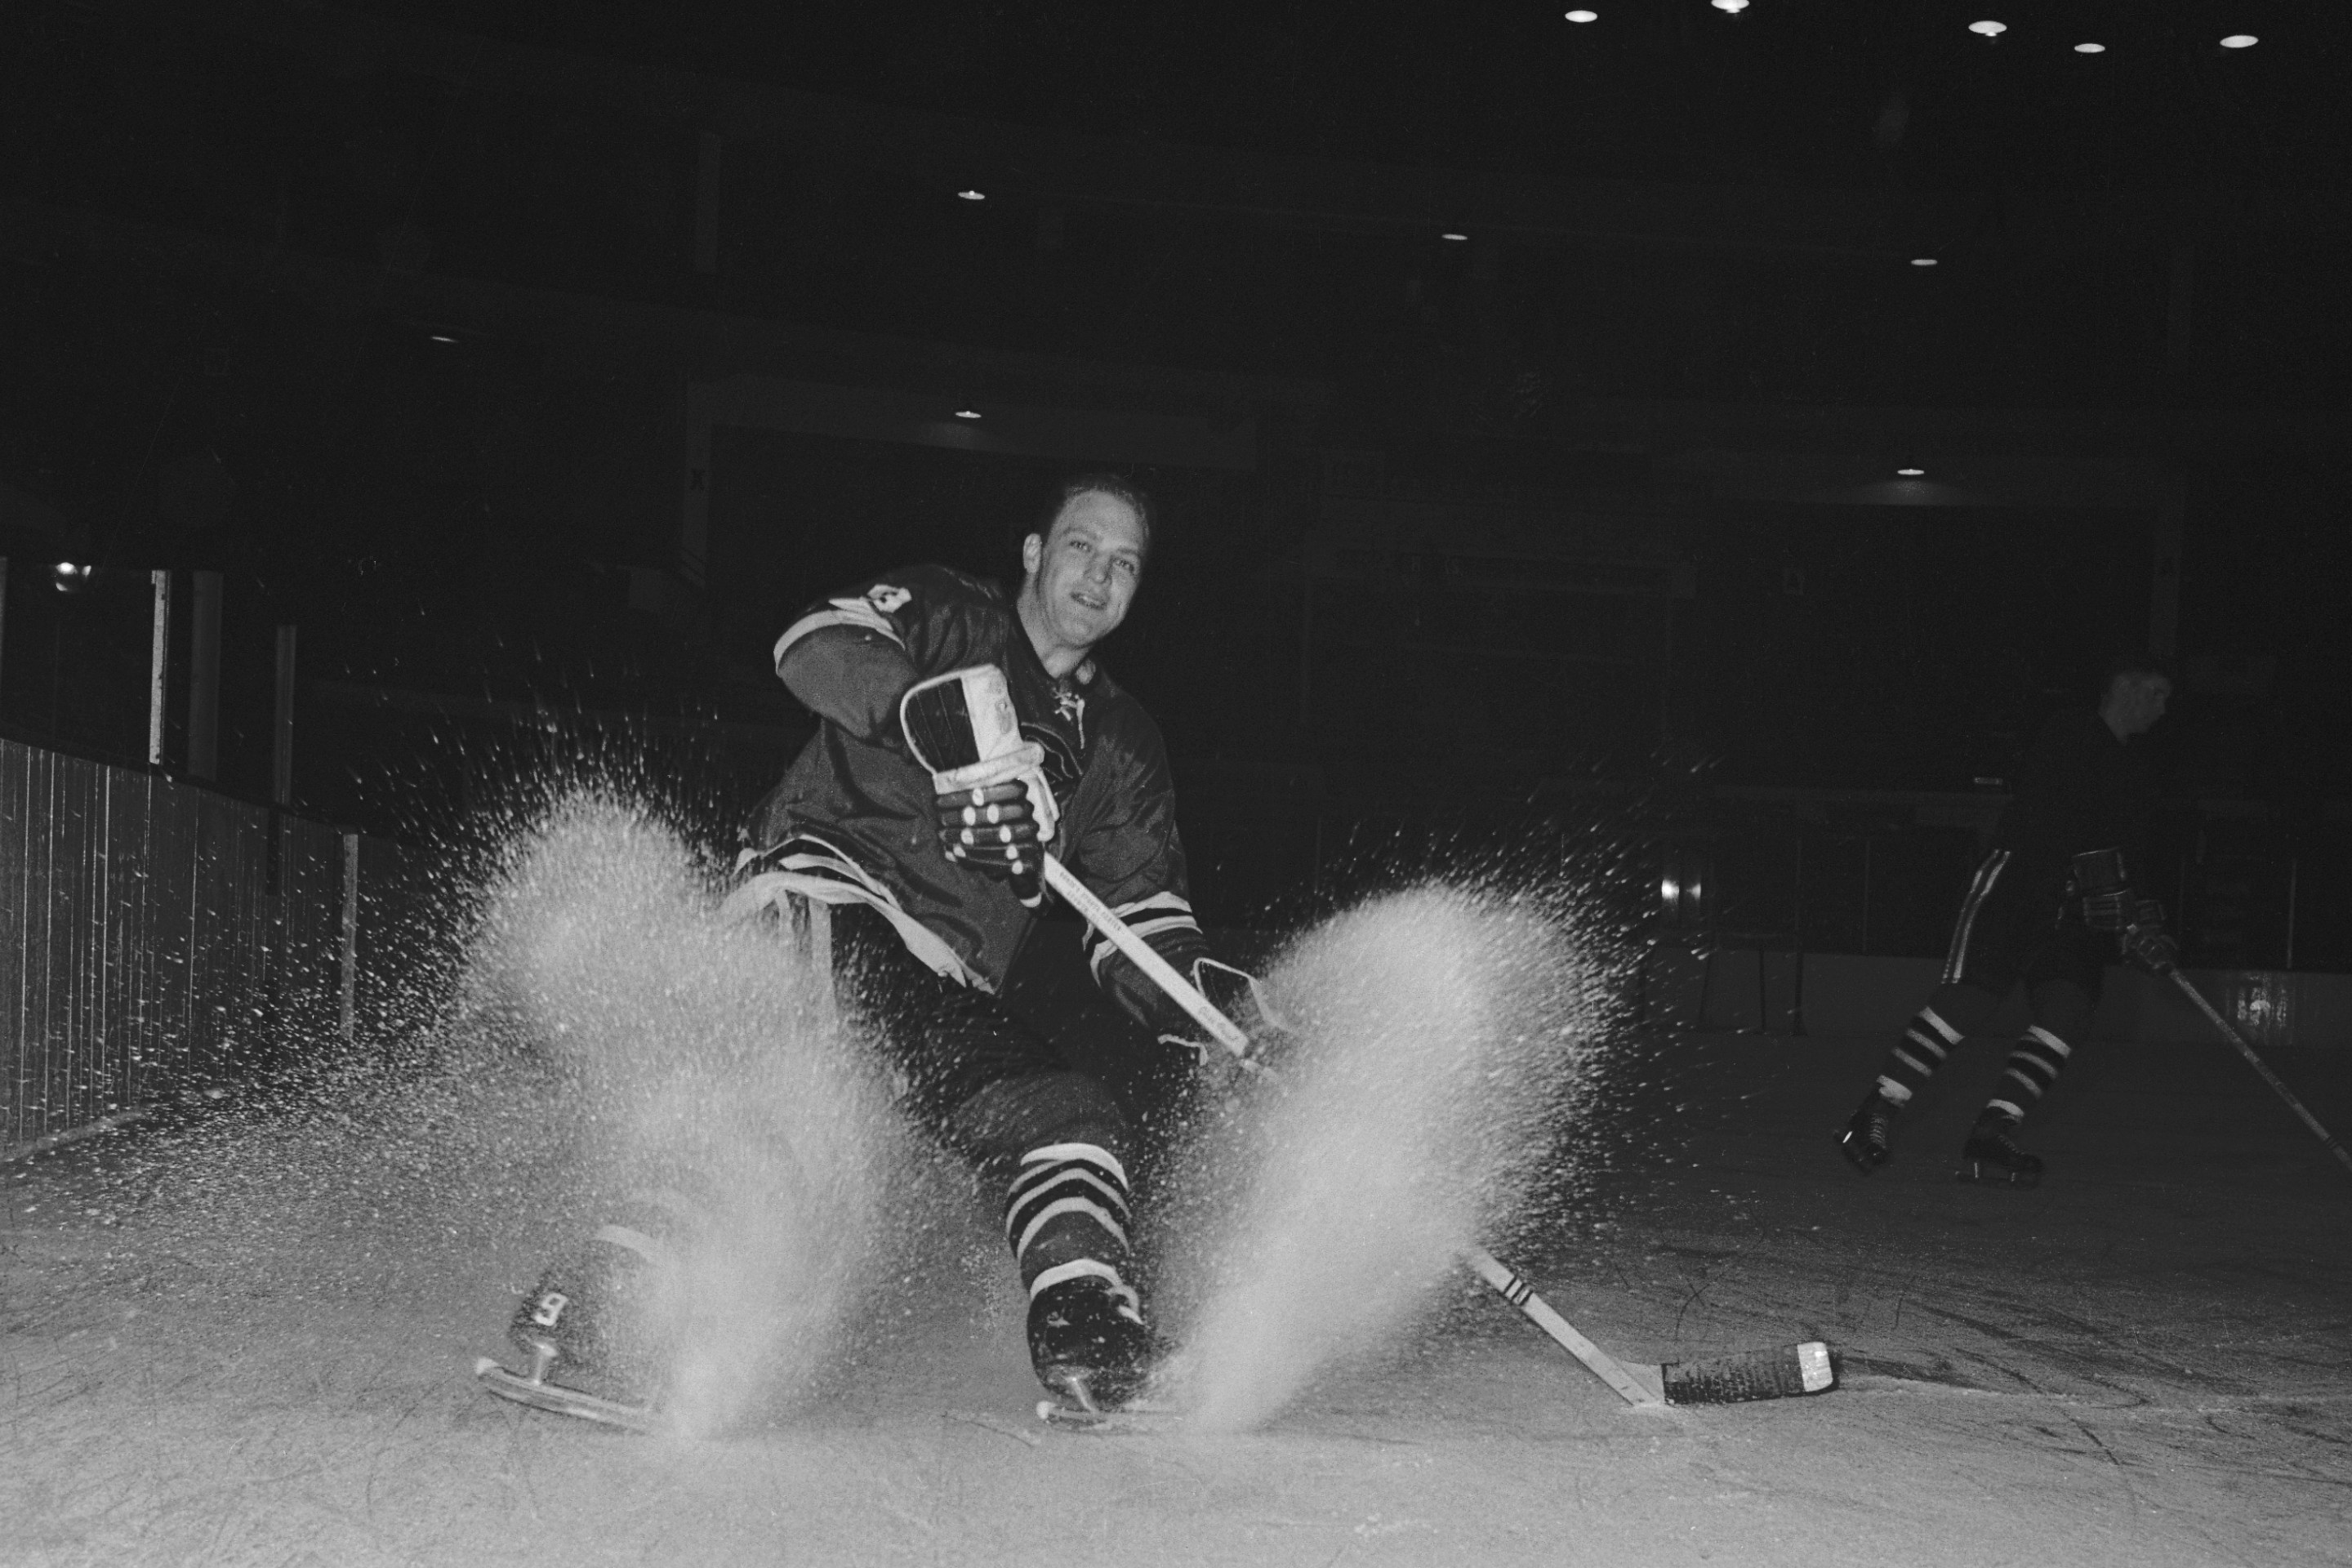 (Original Caption) Chicago Black Hawk Bobby Hull skids to a stop on the ice.